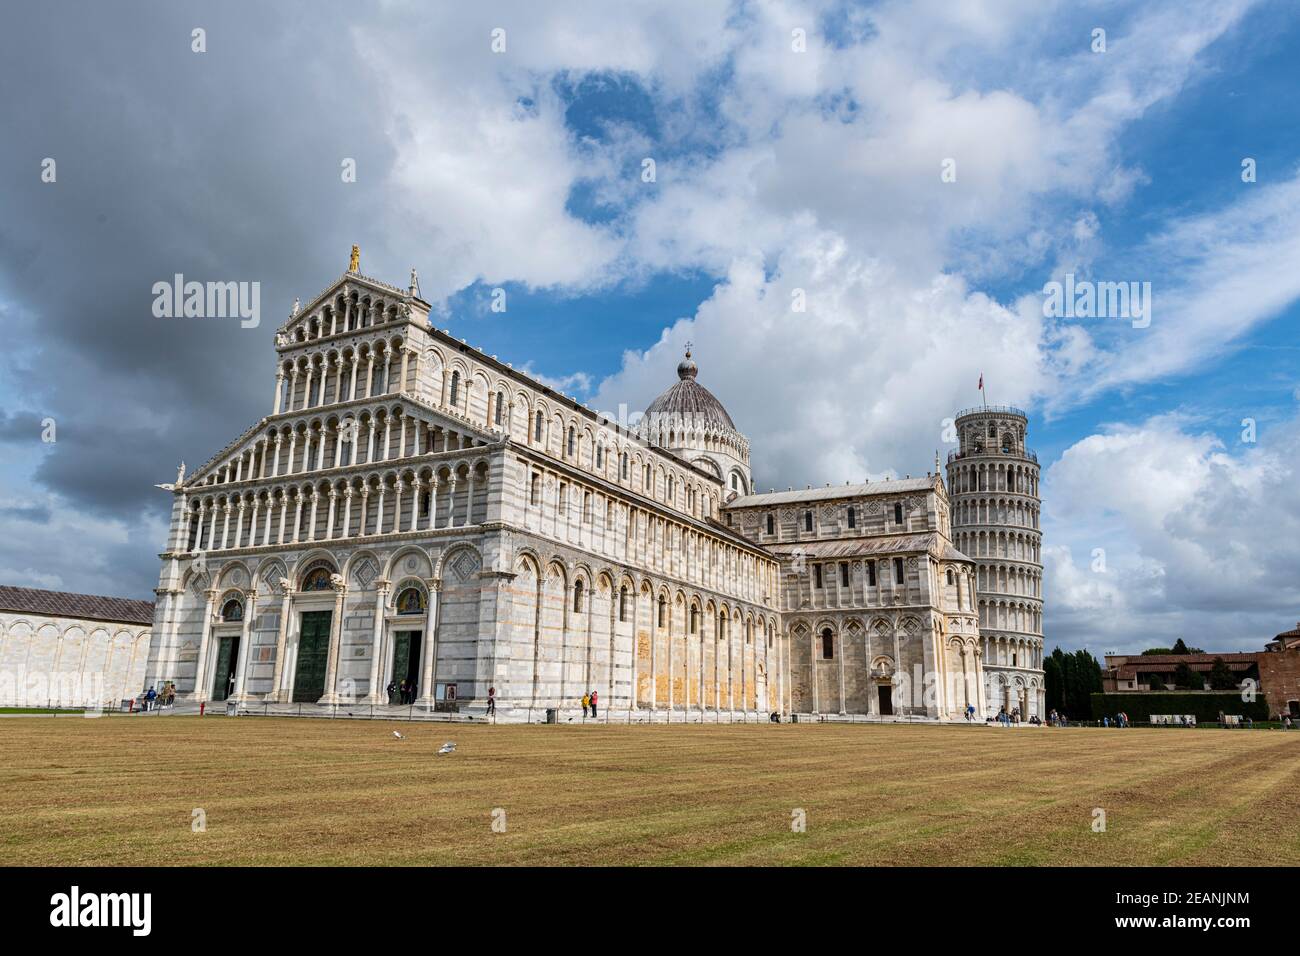 Piazza del Duomo with Cathedral and Leaning Tower, UNESCO World Heritage Site, Pisa, Tuscany, Italy, Europe Stock Photo